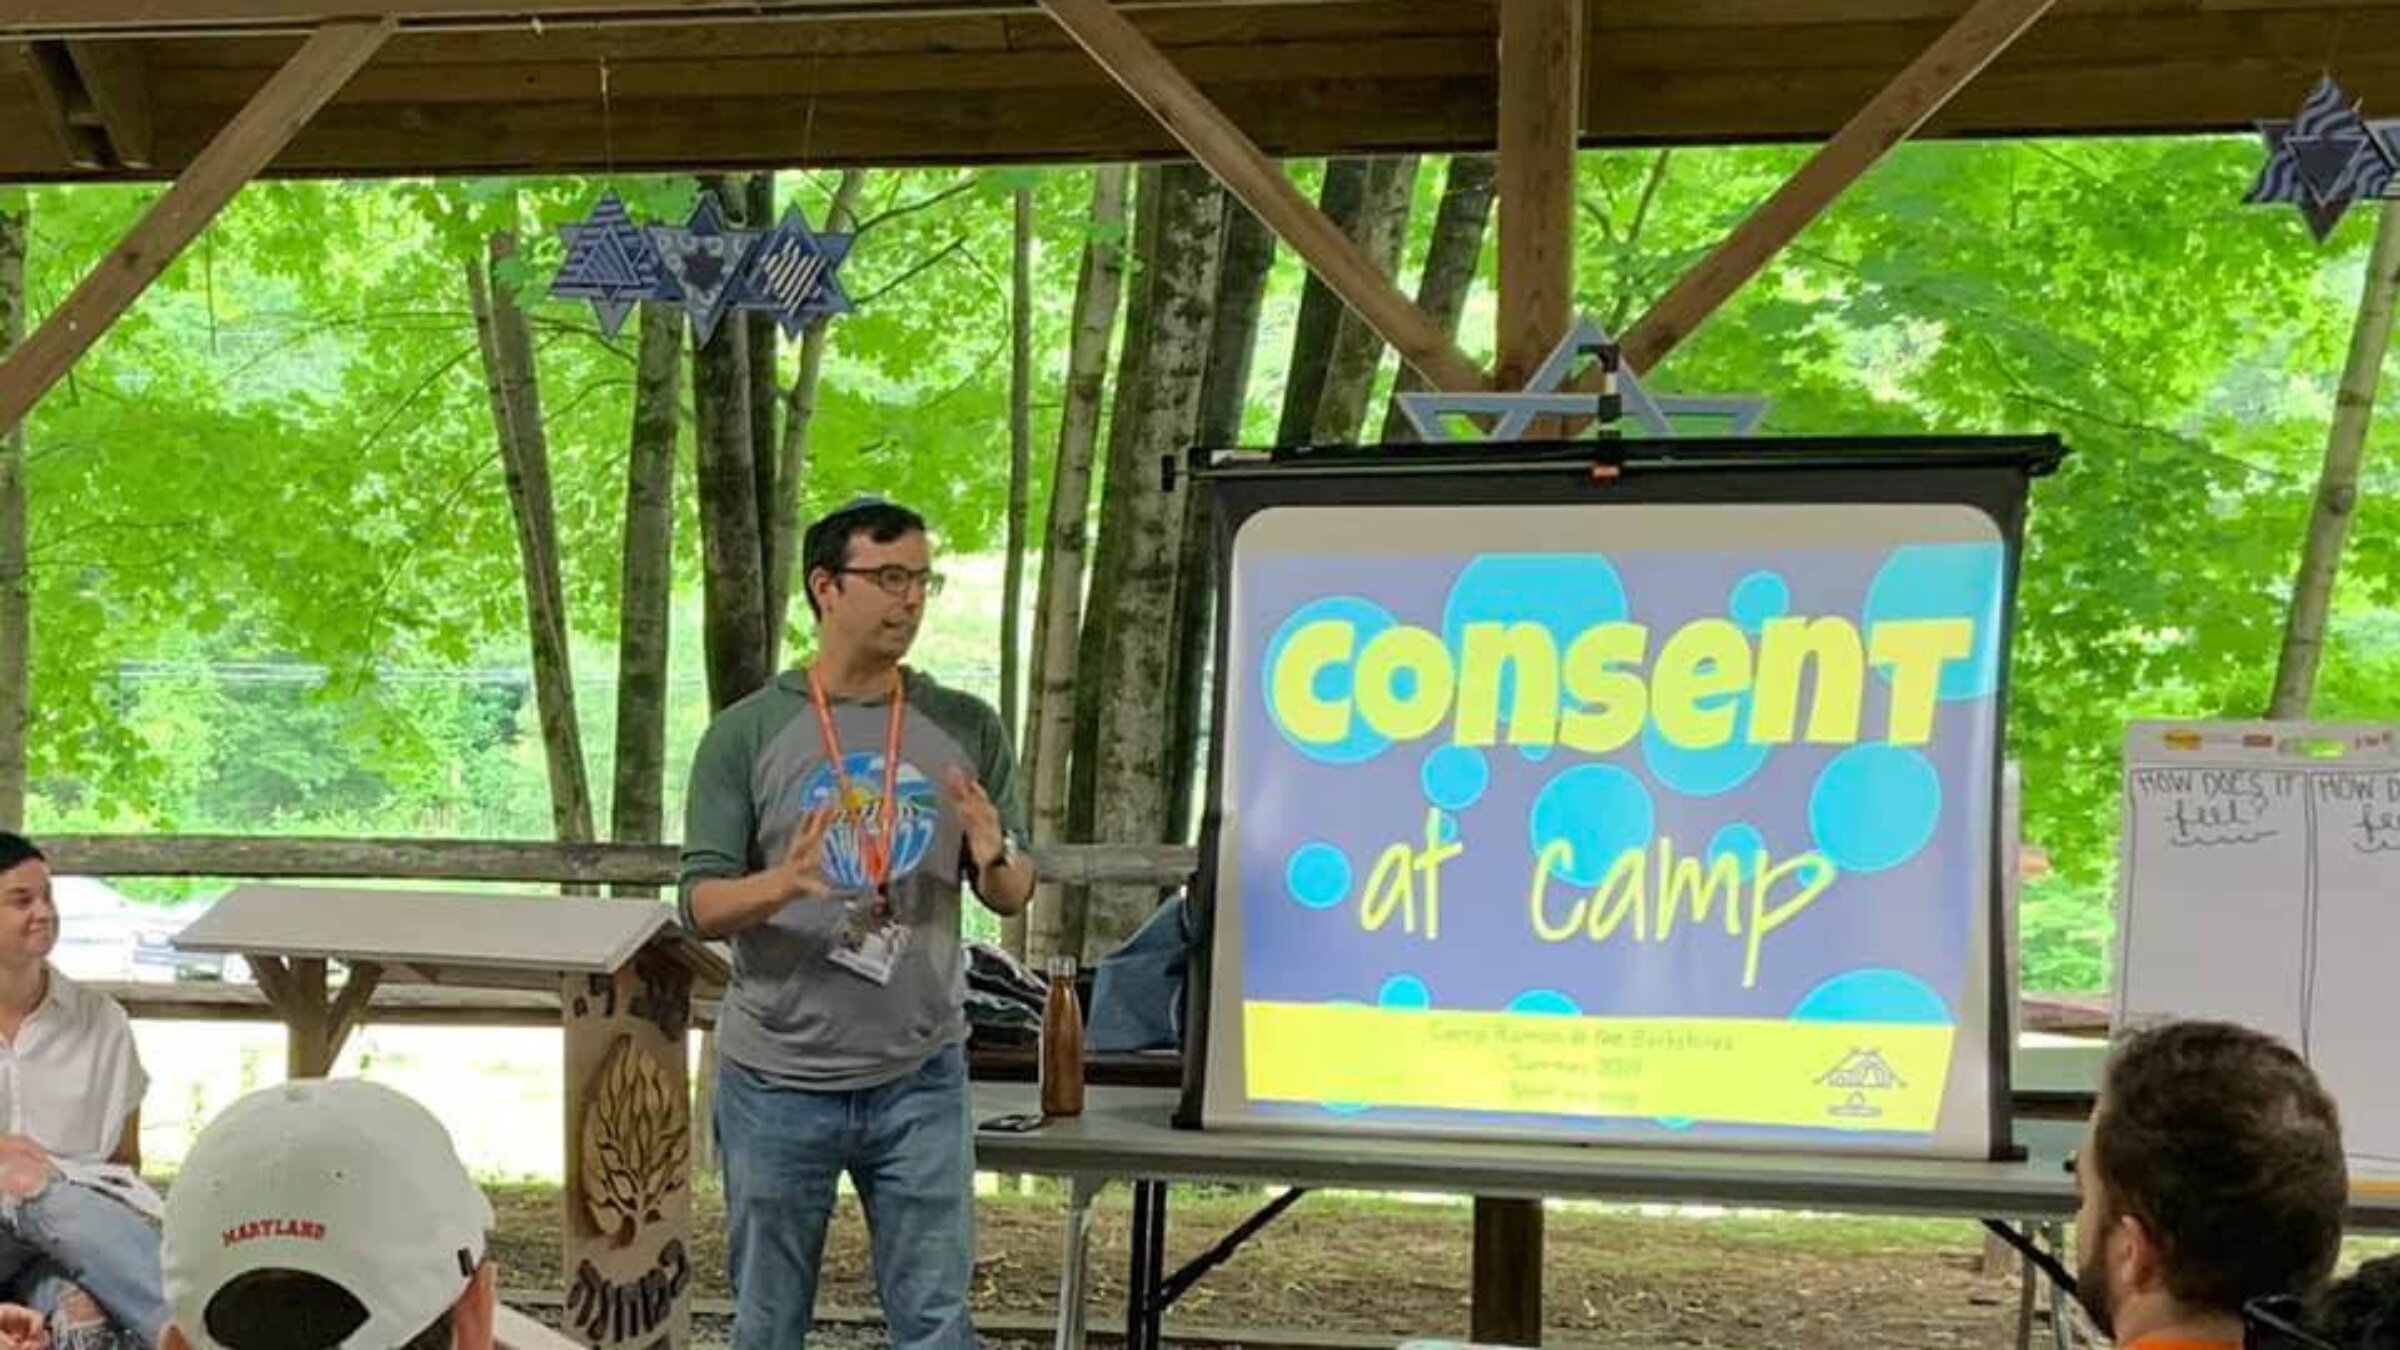 Rabbi Ethan Linden, director of Camp Ramah in the Berkshires, gives a presentation at an outdoor venue standing in front a screen that says "Consent at Camp."